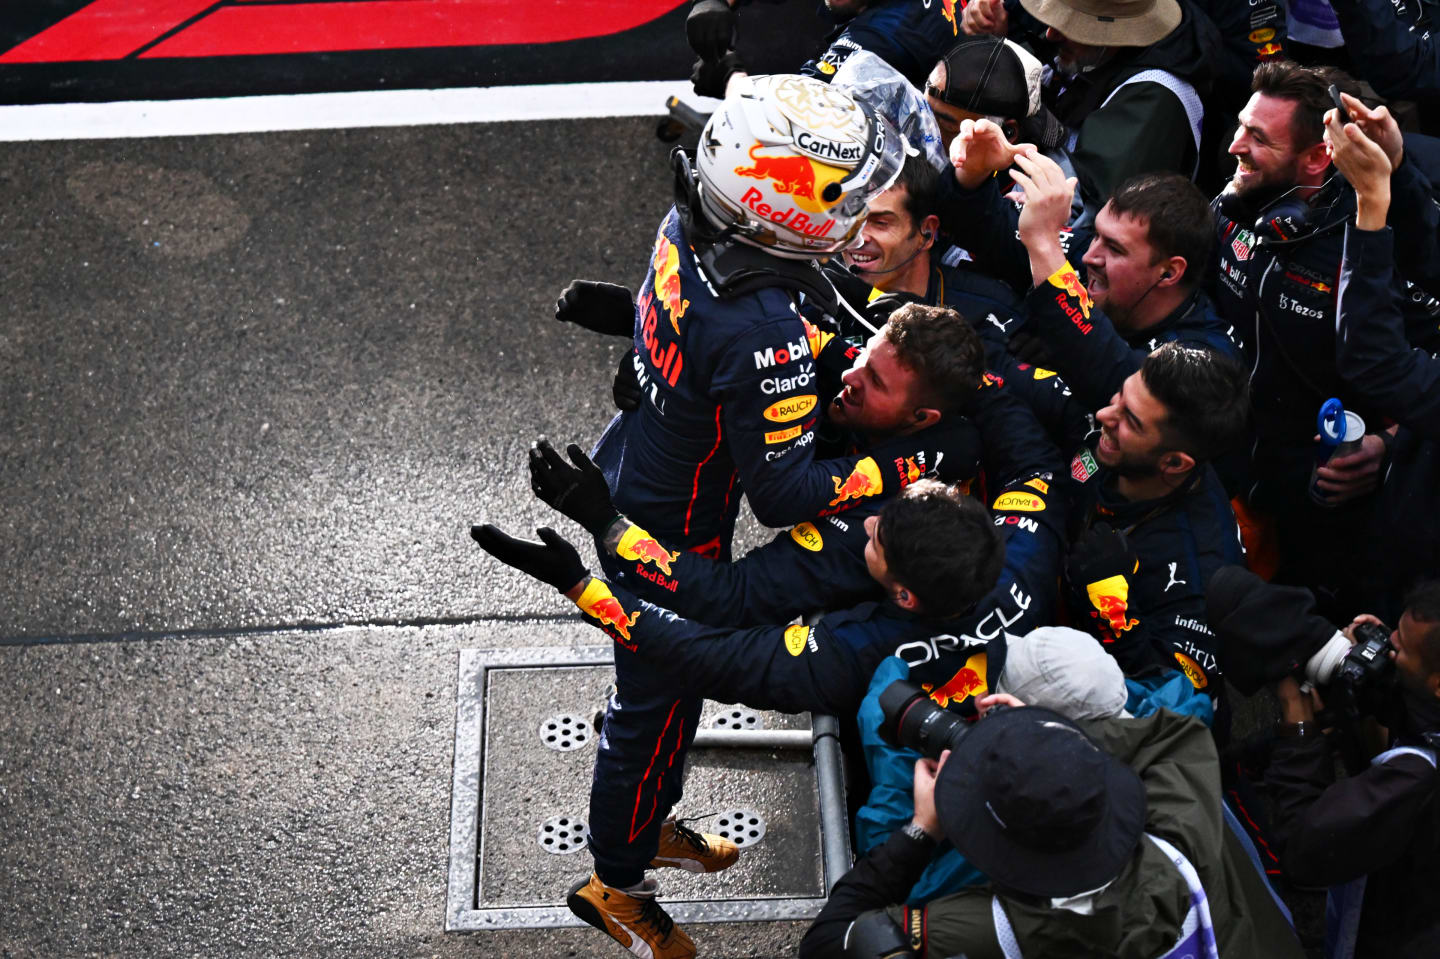 SUZUKA, JAPAN - OCTOBER 09: Race winner and 2022 F1 World Drivers Champion Max Verstappen of Netherlands and Oracle Red Bull Racing celebrates with his team in parc ferme during the F1 Grand Prix of Japan at Suzuka International Racing Course on October 09, 2022 in Suzuka, Japan. (Photo by Clive Mason/Getty Images)